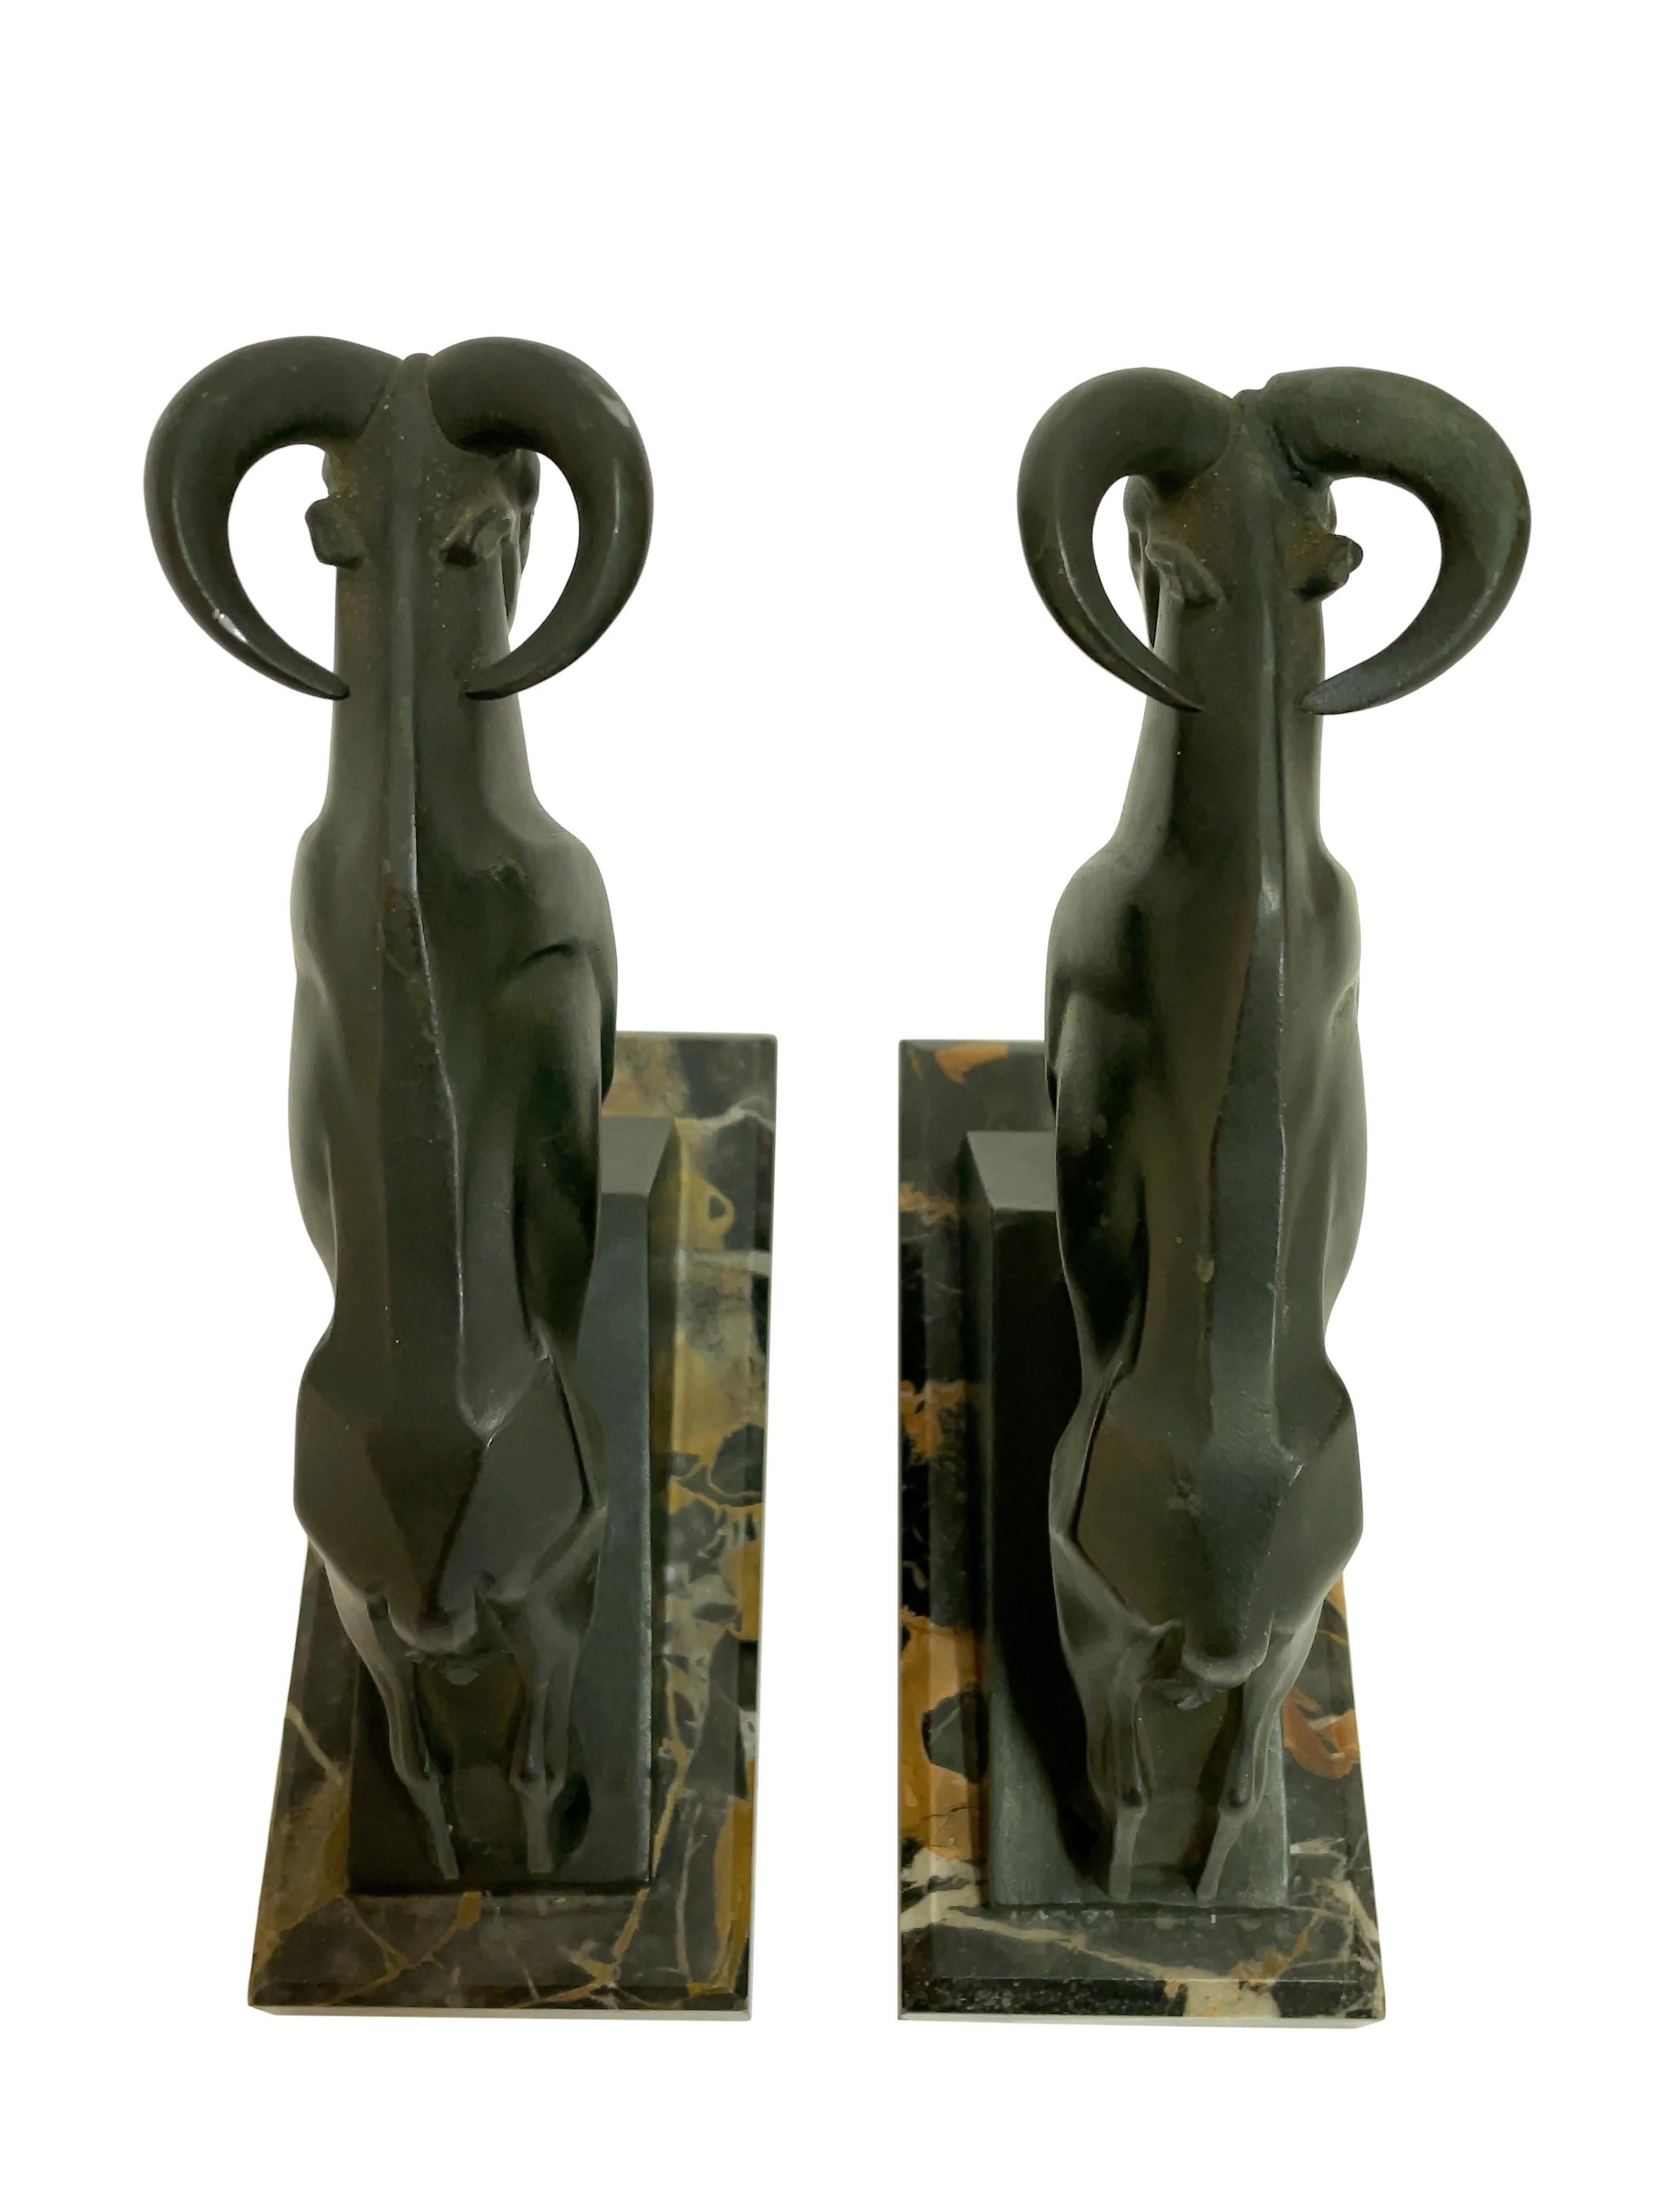 Spelter Mouflon Original Art Deco Bookends of Two Aries by Max Le Verrier with Patina